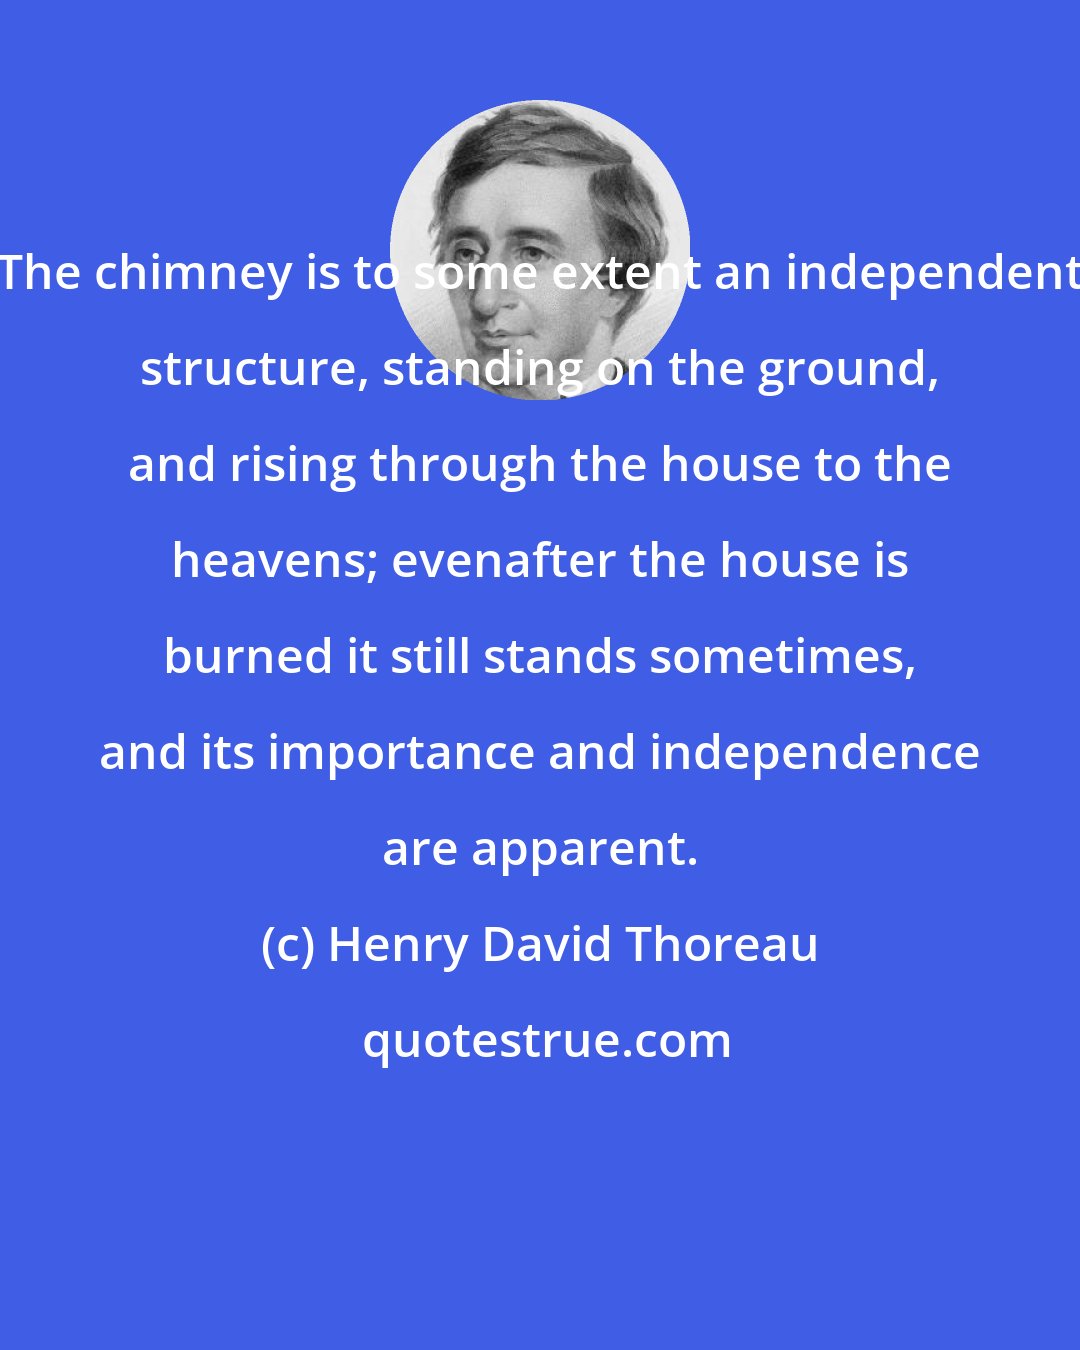 Henry David Thoreau: The chimney is to some extent an independent structure, standing on the ground, and rising through the house to the heavens; evenafter the house is burned it still stands sometimes, and its importance and independence are apparent.